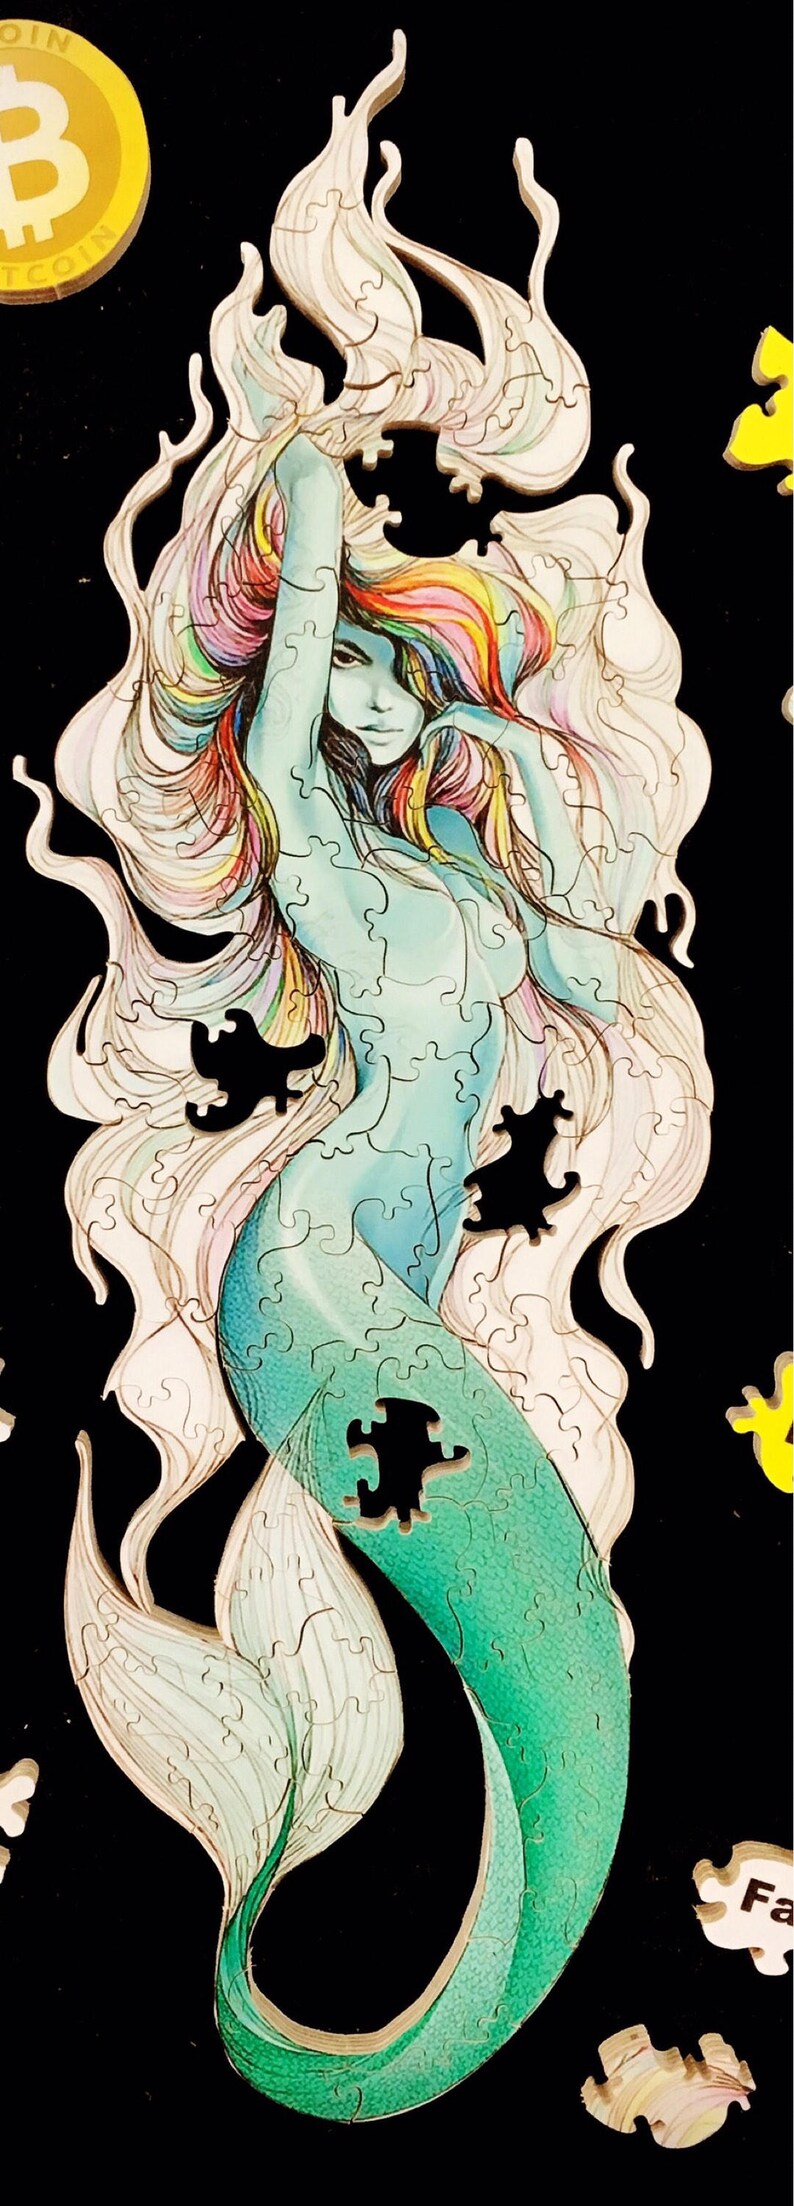 Mermaid Jigsaw Puzzle 100% Handcrafted Wooden Jigsaw Puzzle | Etsy